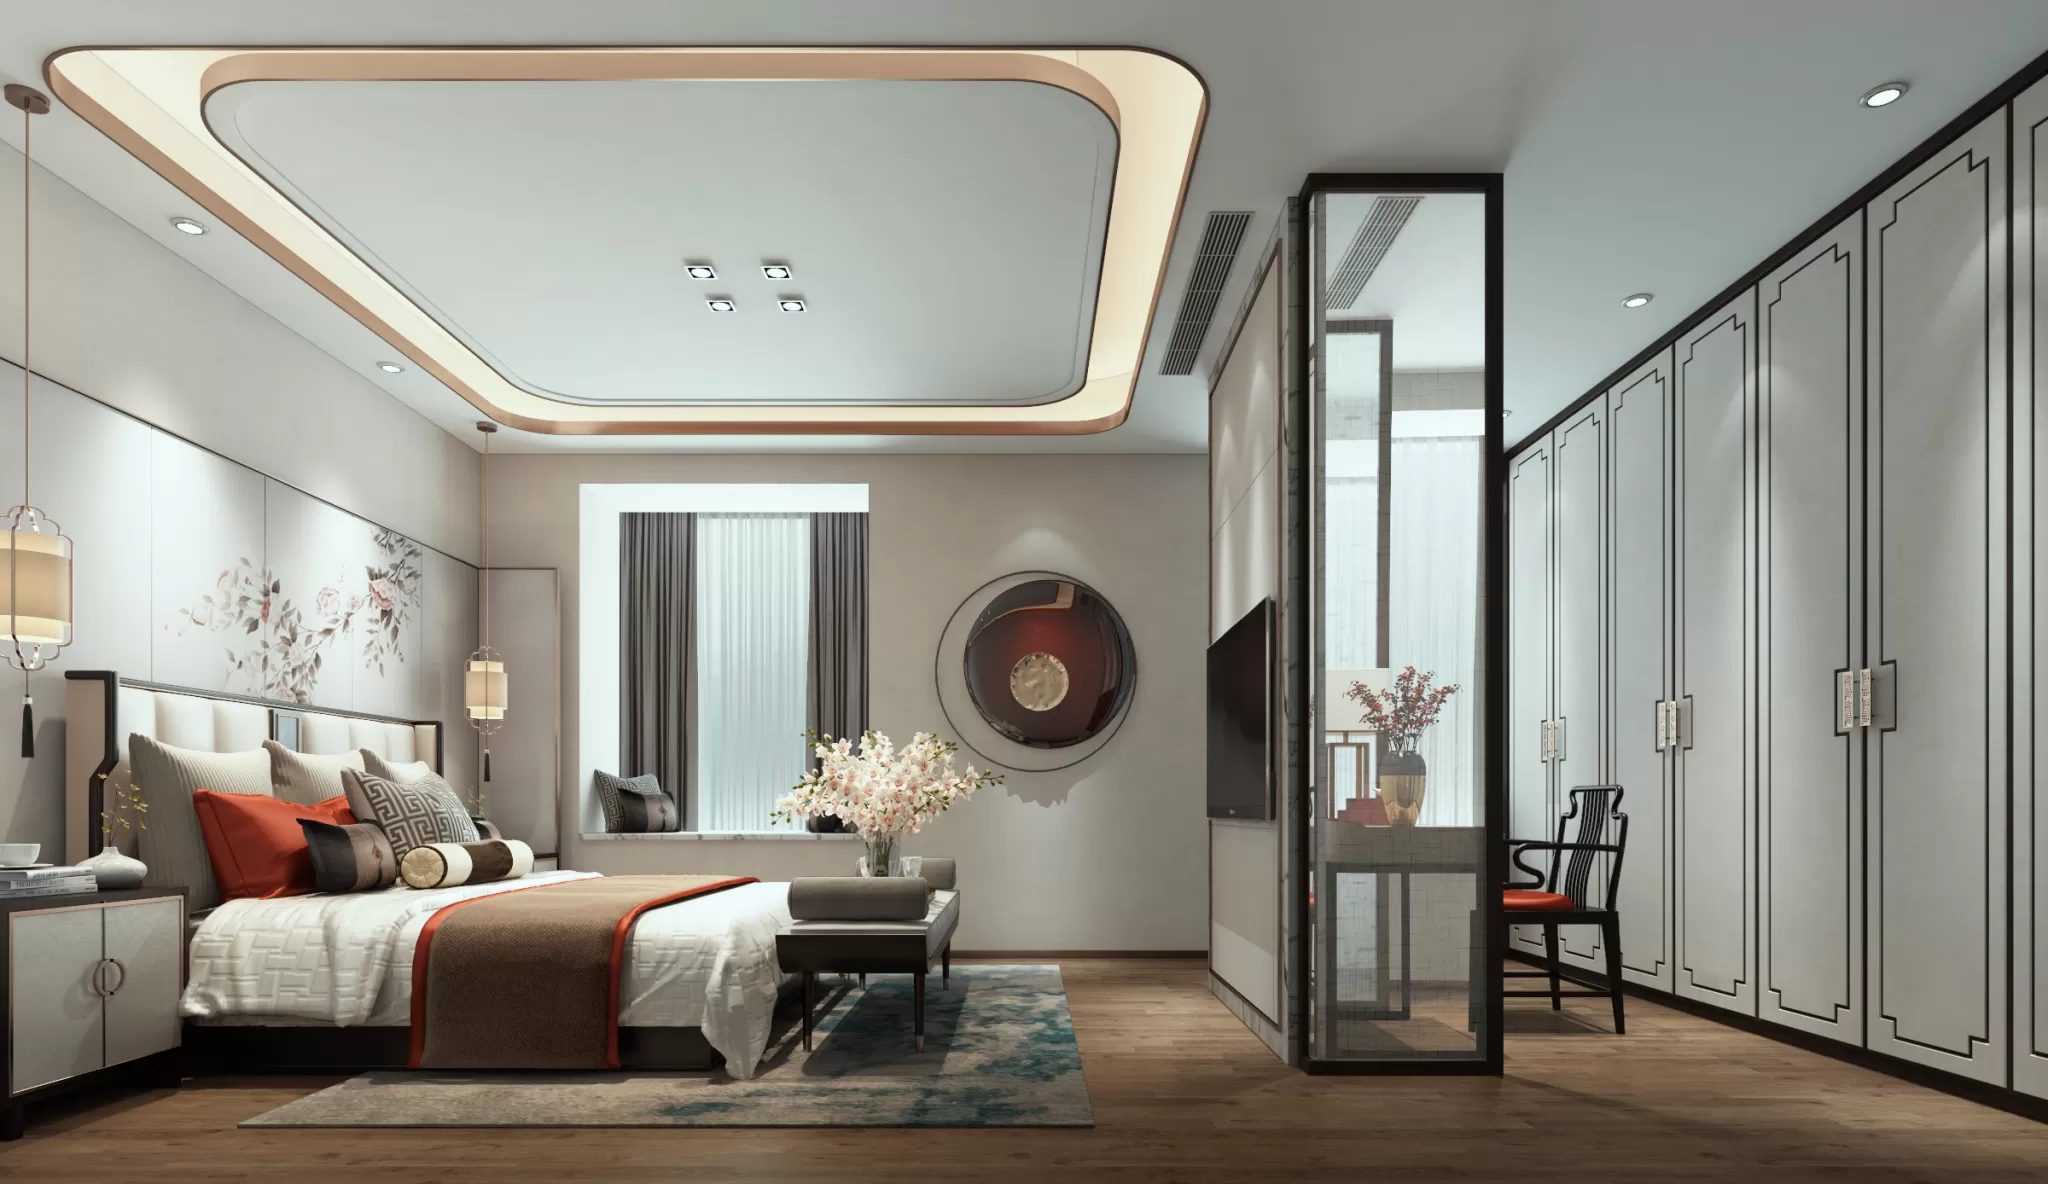 DESMOD INTERIOR 2021 (VRAY)/5. BEDROOM – 2. CHINESE STYLES – 151